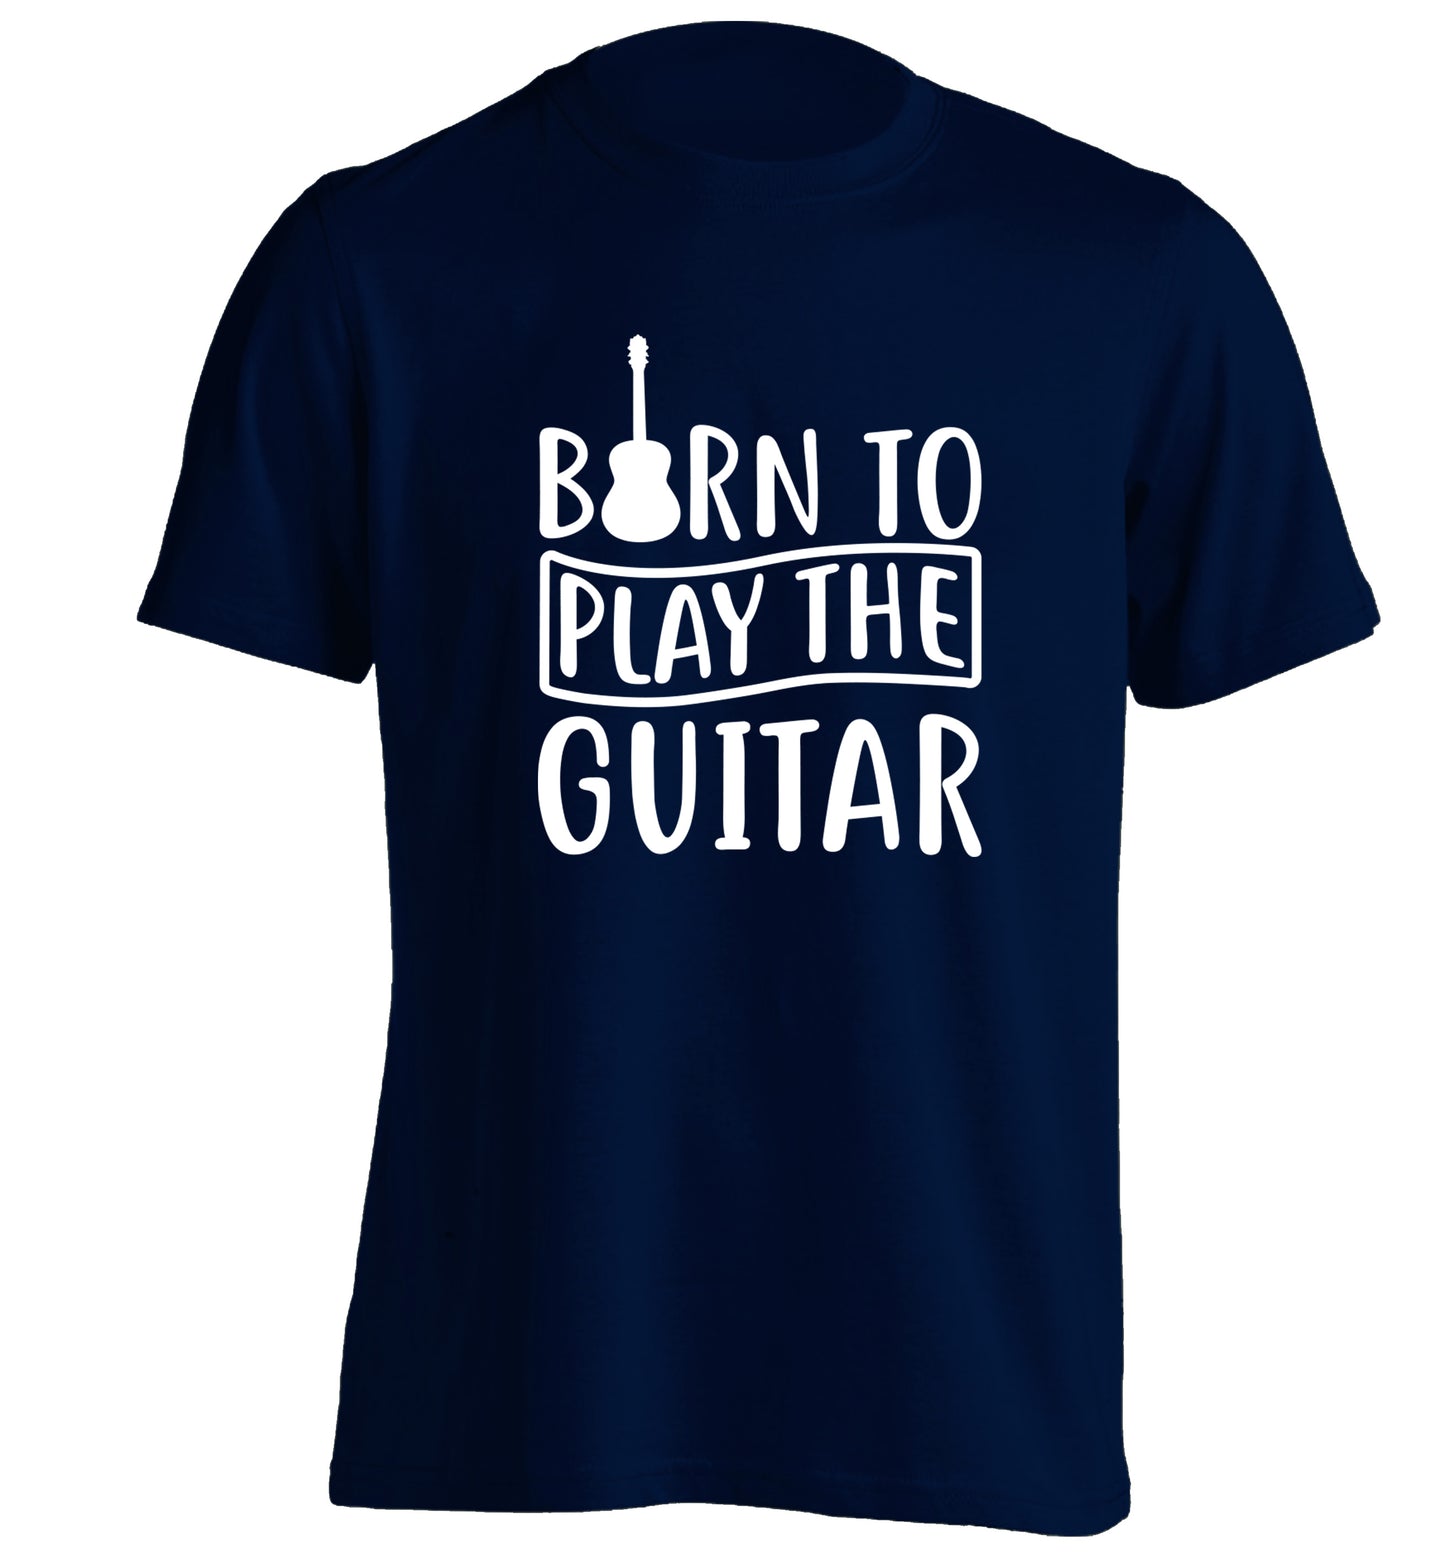 Born to play the guitar adults unisex navy Tshirt 2XL